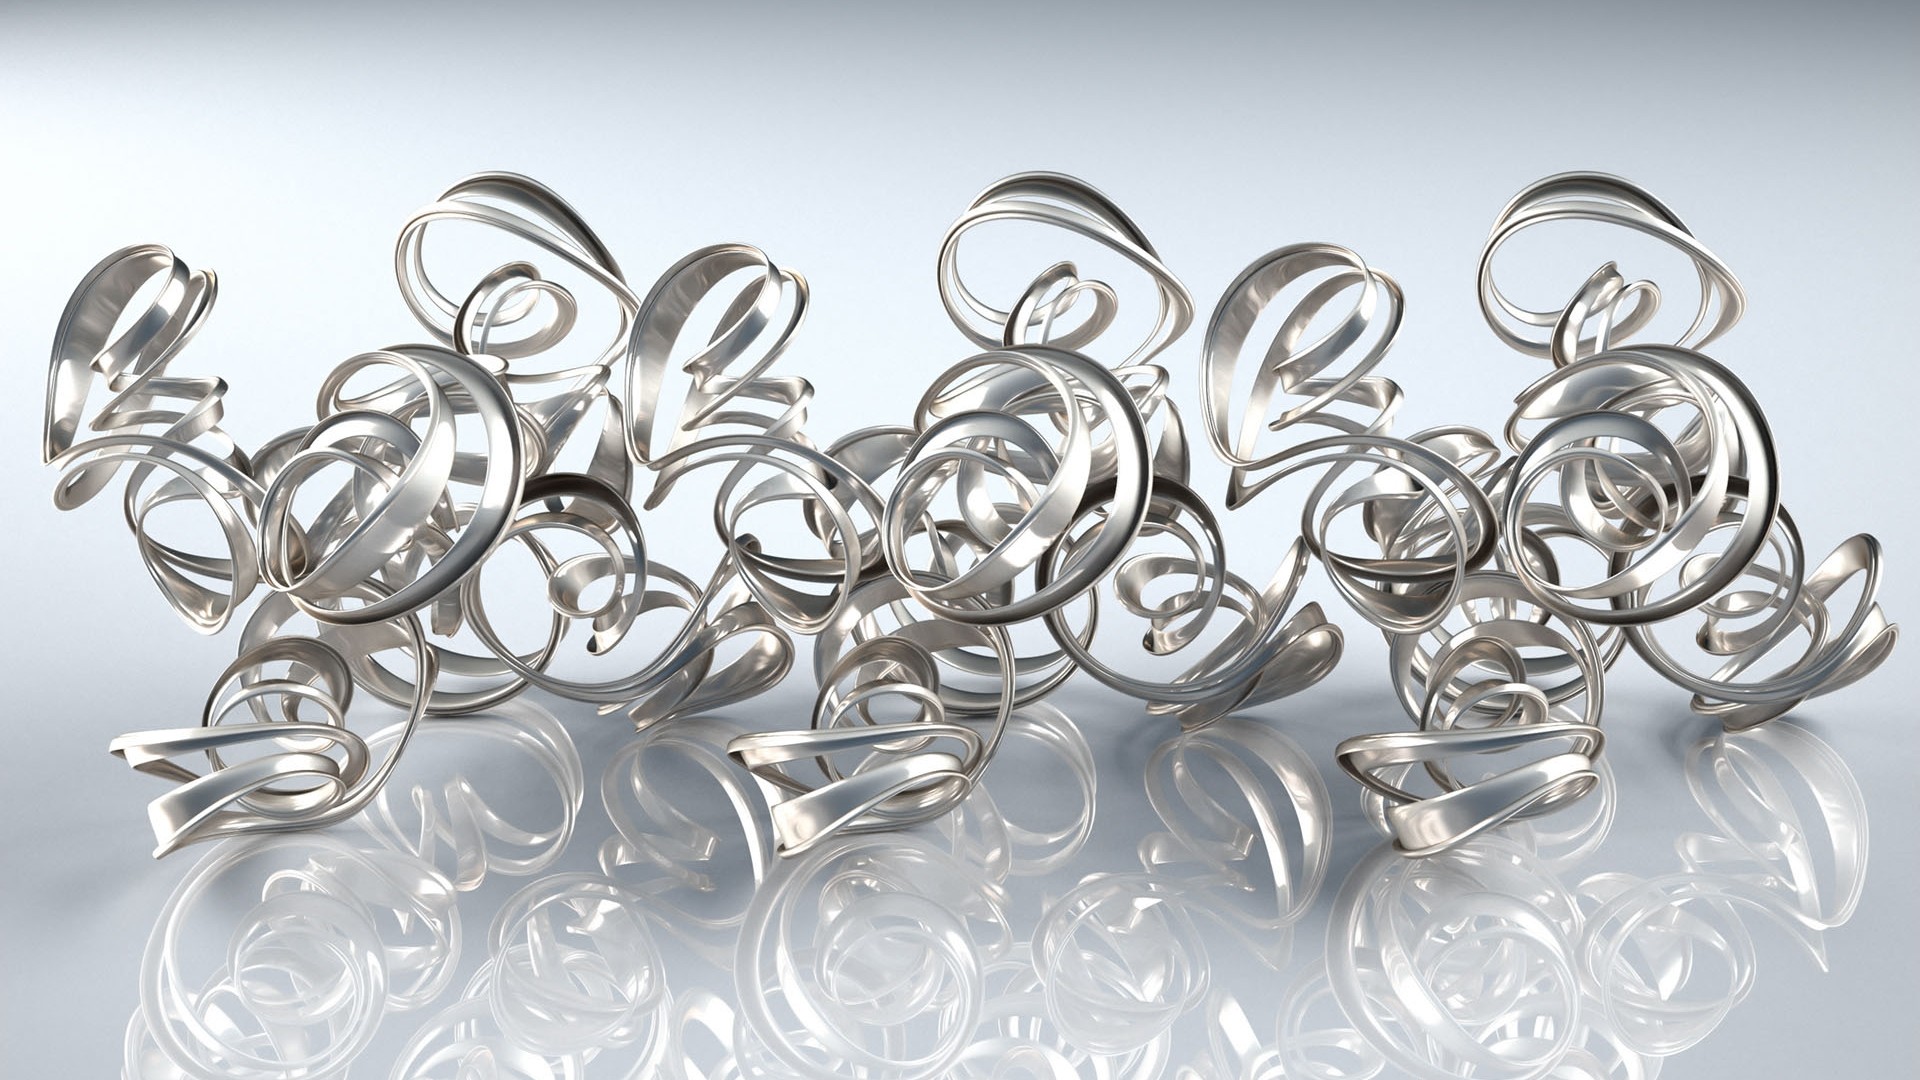 General 1920x1080 abstract photoshopped CGI digital art shapes swirls gradient reflection silver white